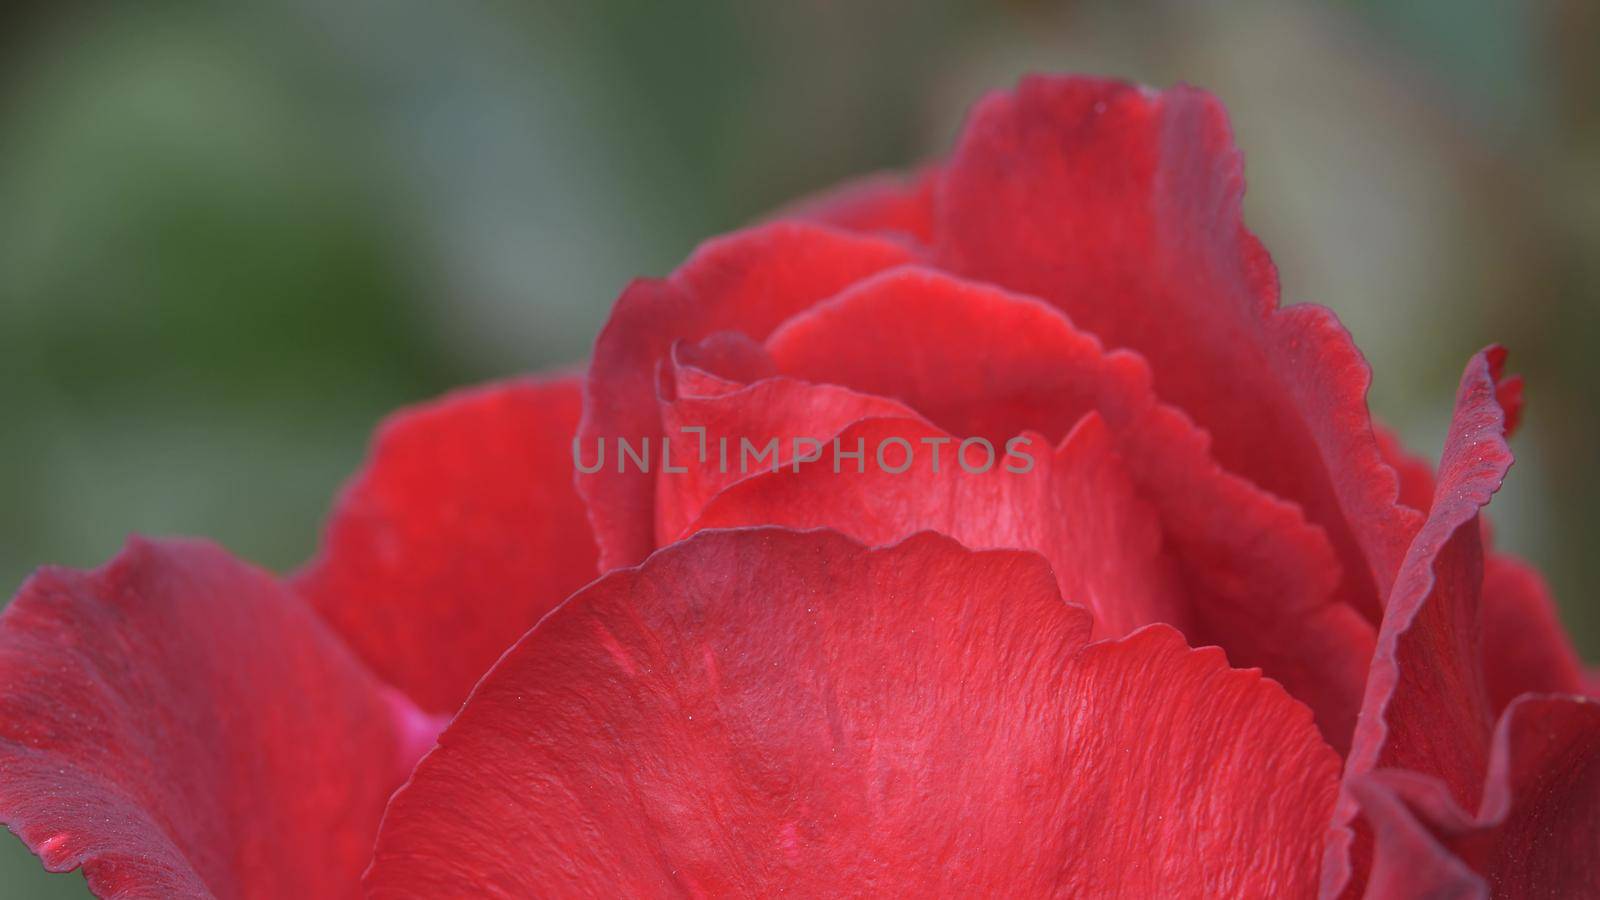 Camera moves along the bud of a red garden rose. by kenonl